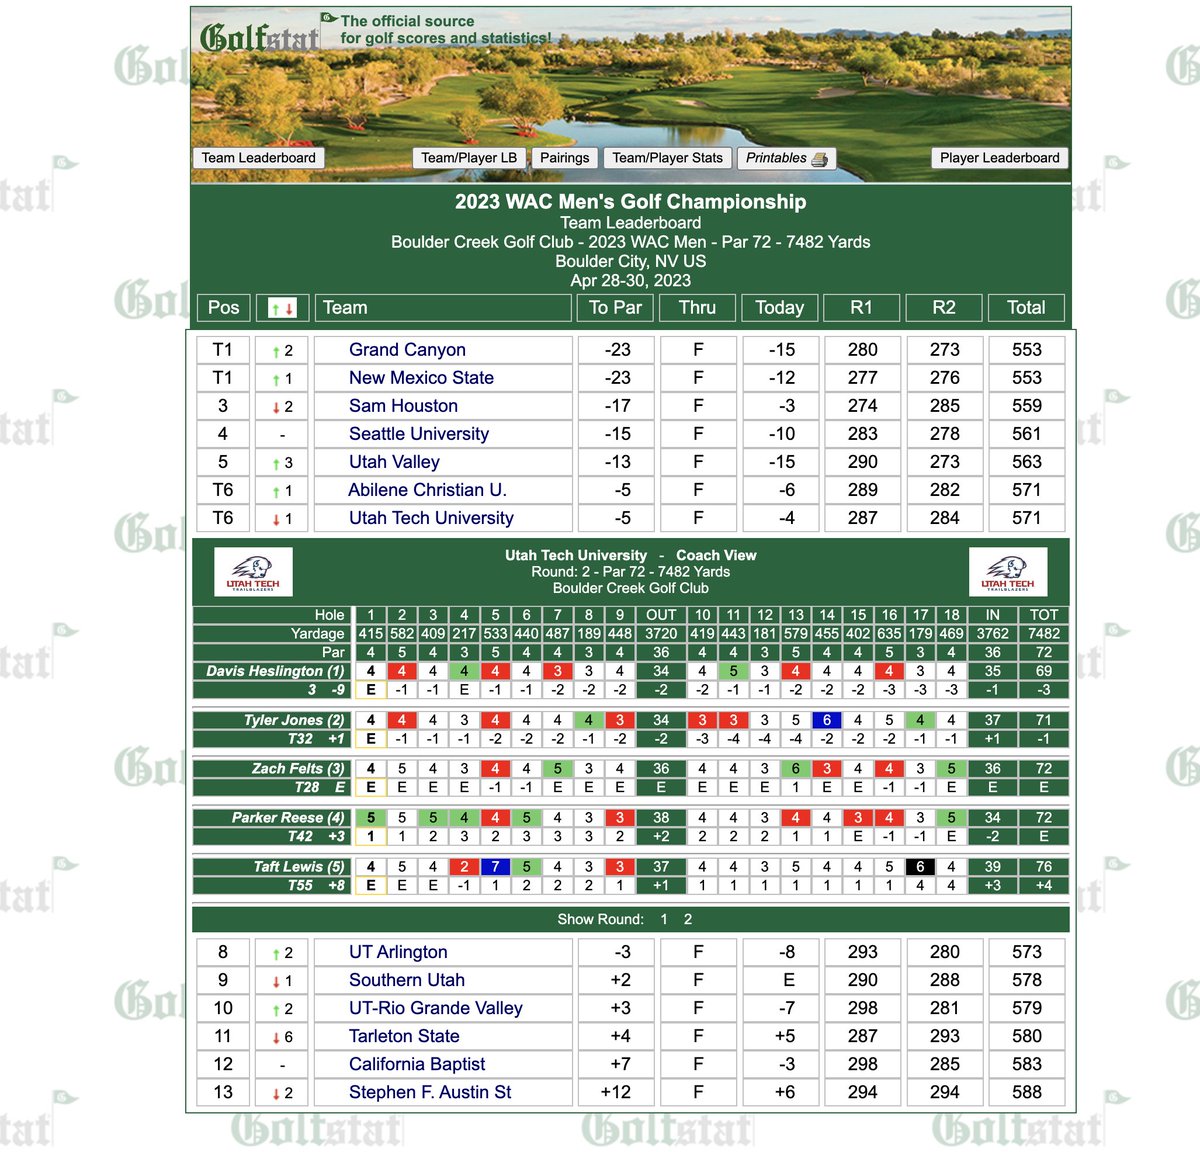 The Trailblazers are t-6th after 36 holes at the 2023 #WACmgolf Championships. Senior @DavisHeslington followed an opening 66 with a 3-under 69 on Saturday and stands 3rd on the leaderboard heading into Sunday's final round!
R3📈 - bit.ly/3L7y6i5
#UtahTechBlazers